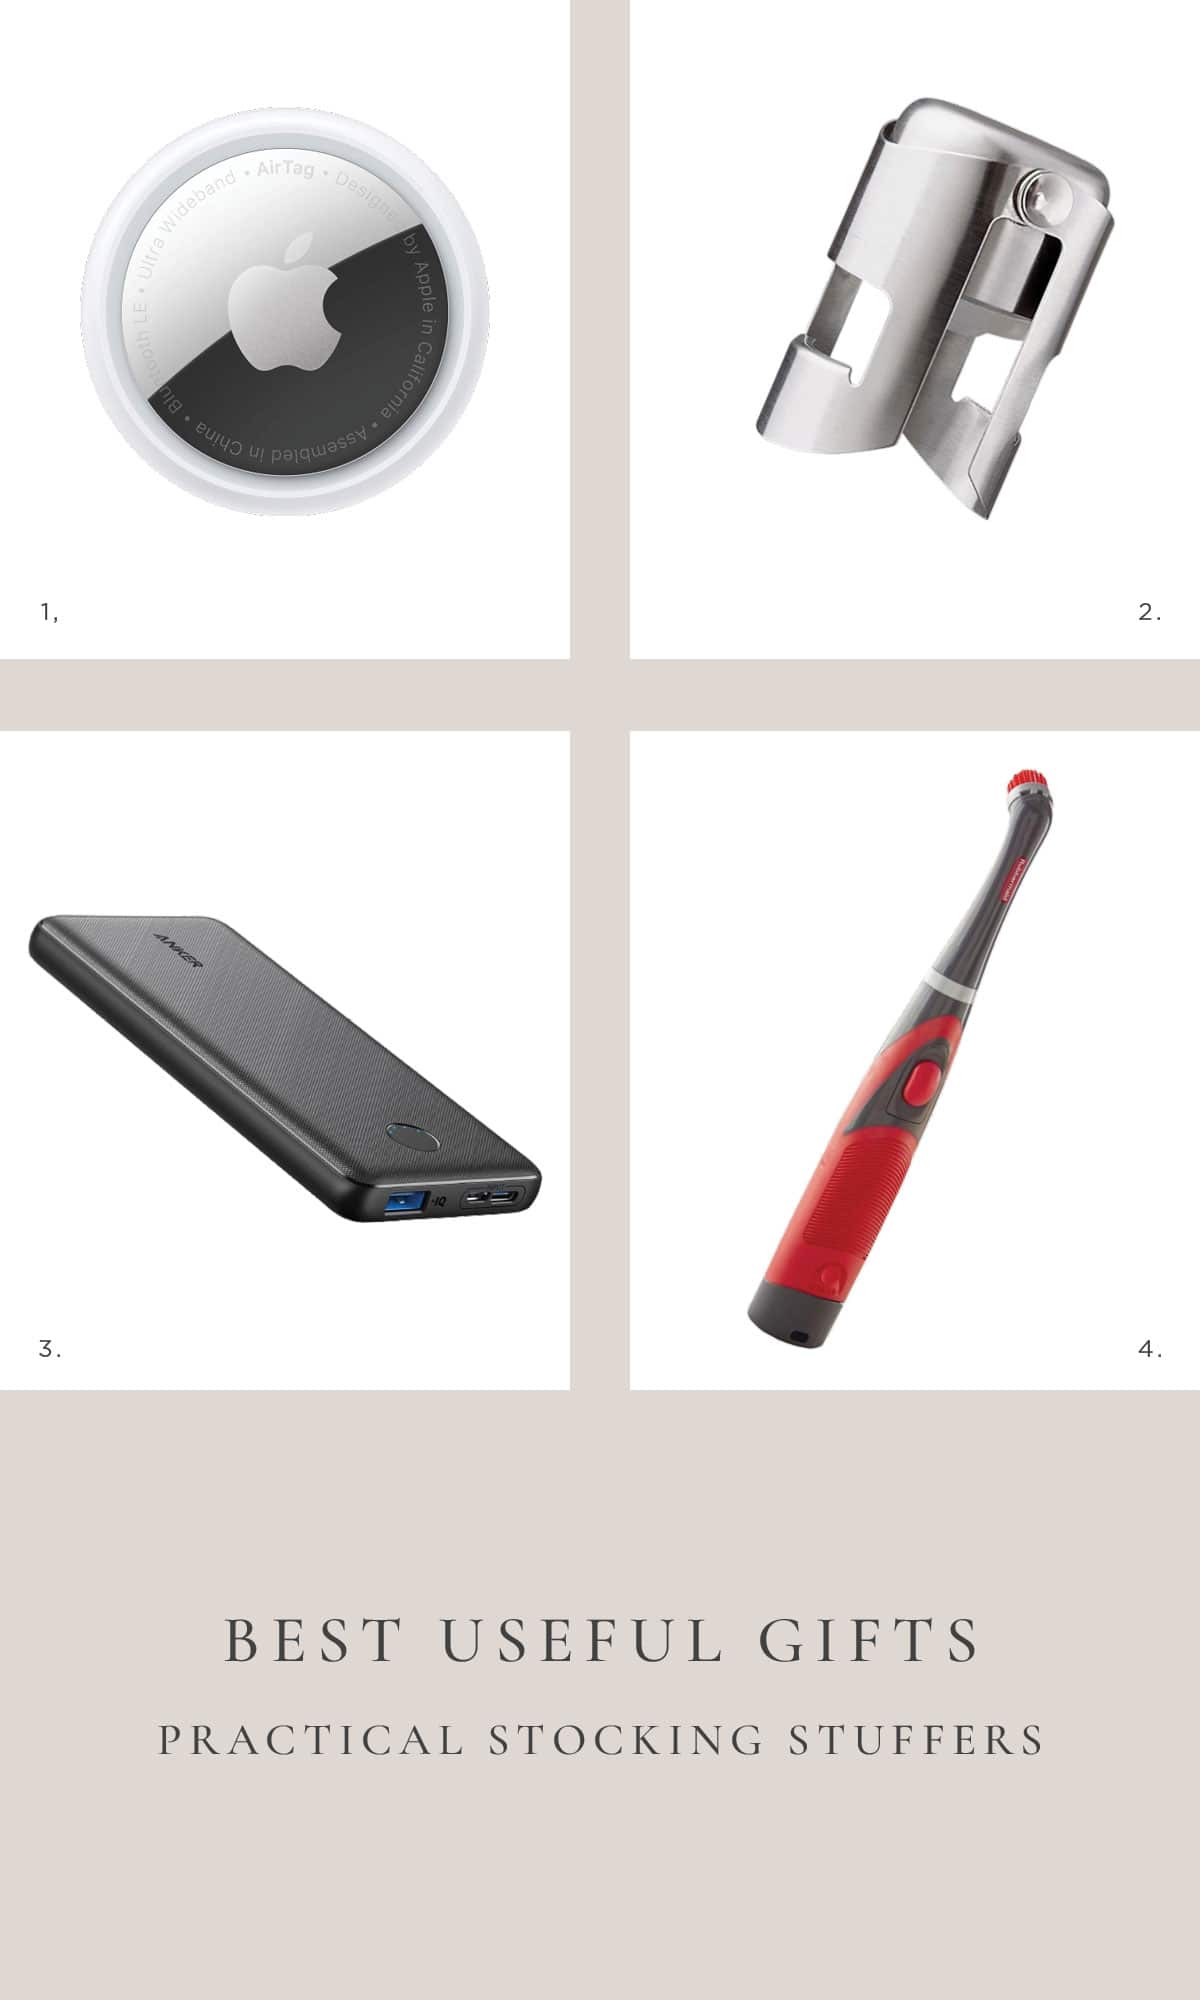 Useful Gift Ideas - The Practical Gift Guide. Useful gifts for stocking stuffers like the best phone charger, cleaning scrubber, and apple airtag